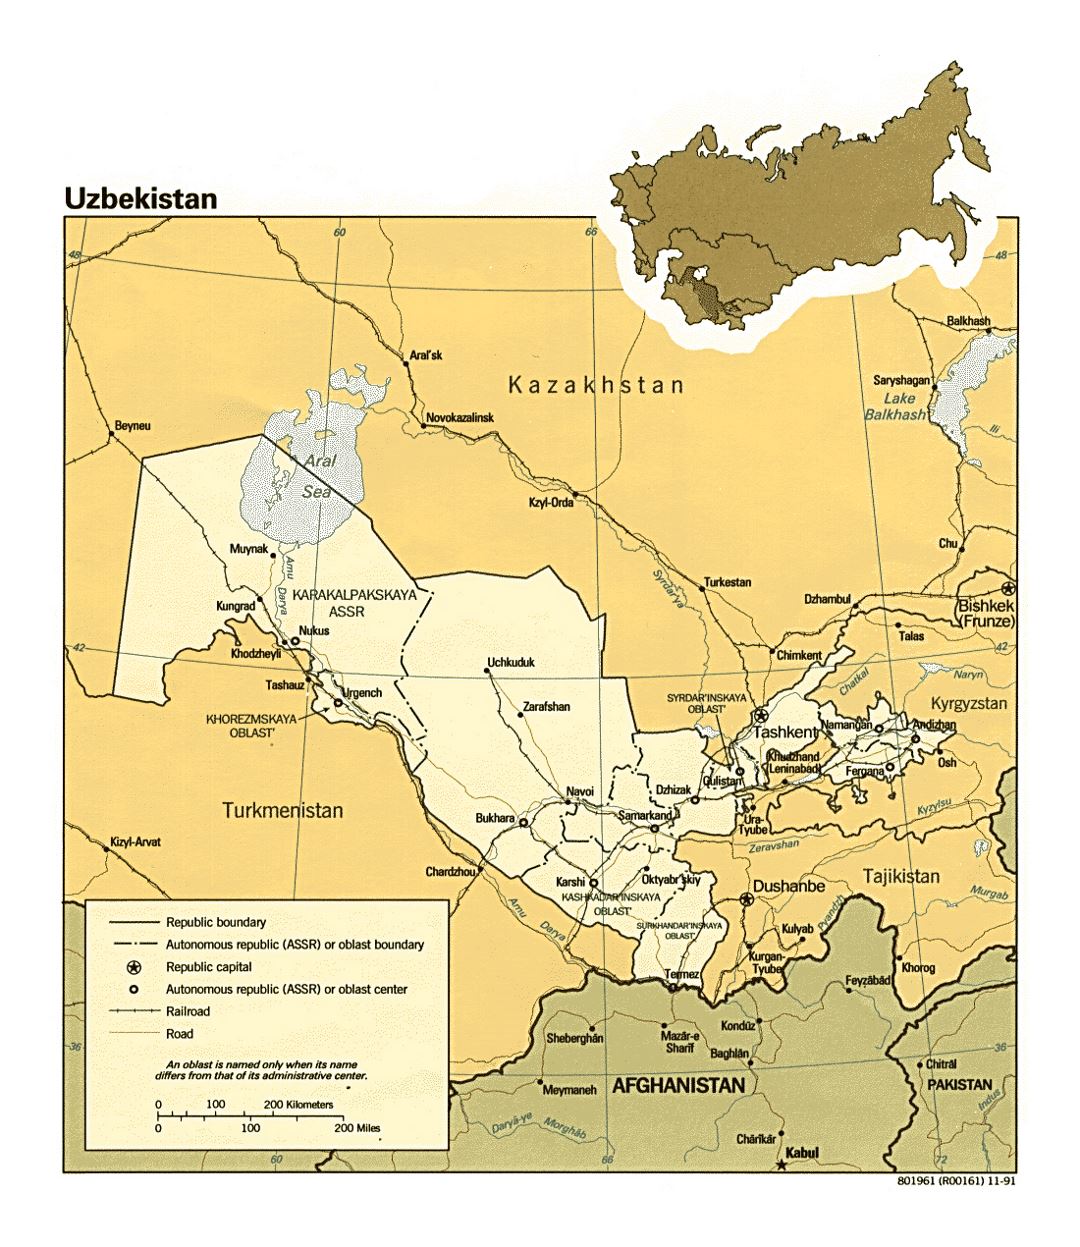 Detailed political and administrative map of Uzbekistan with roads, railroads and major cities - 1991